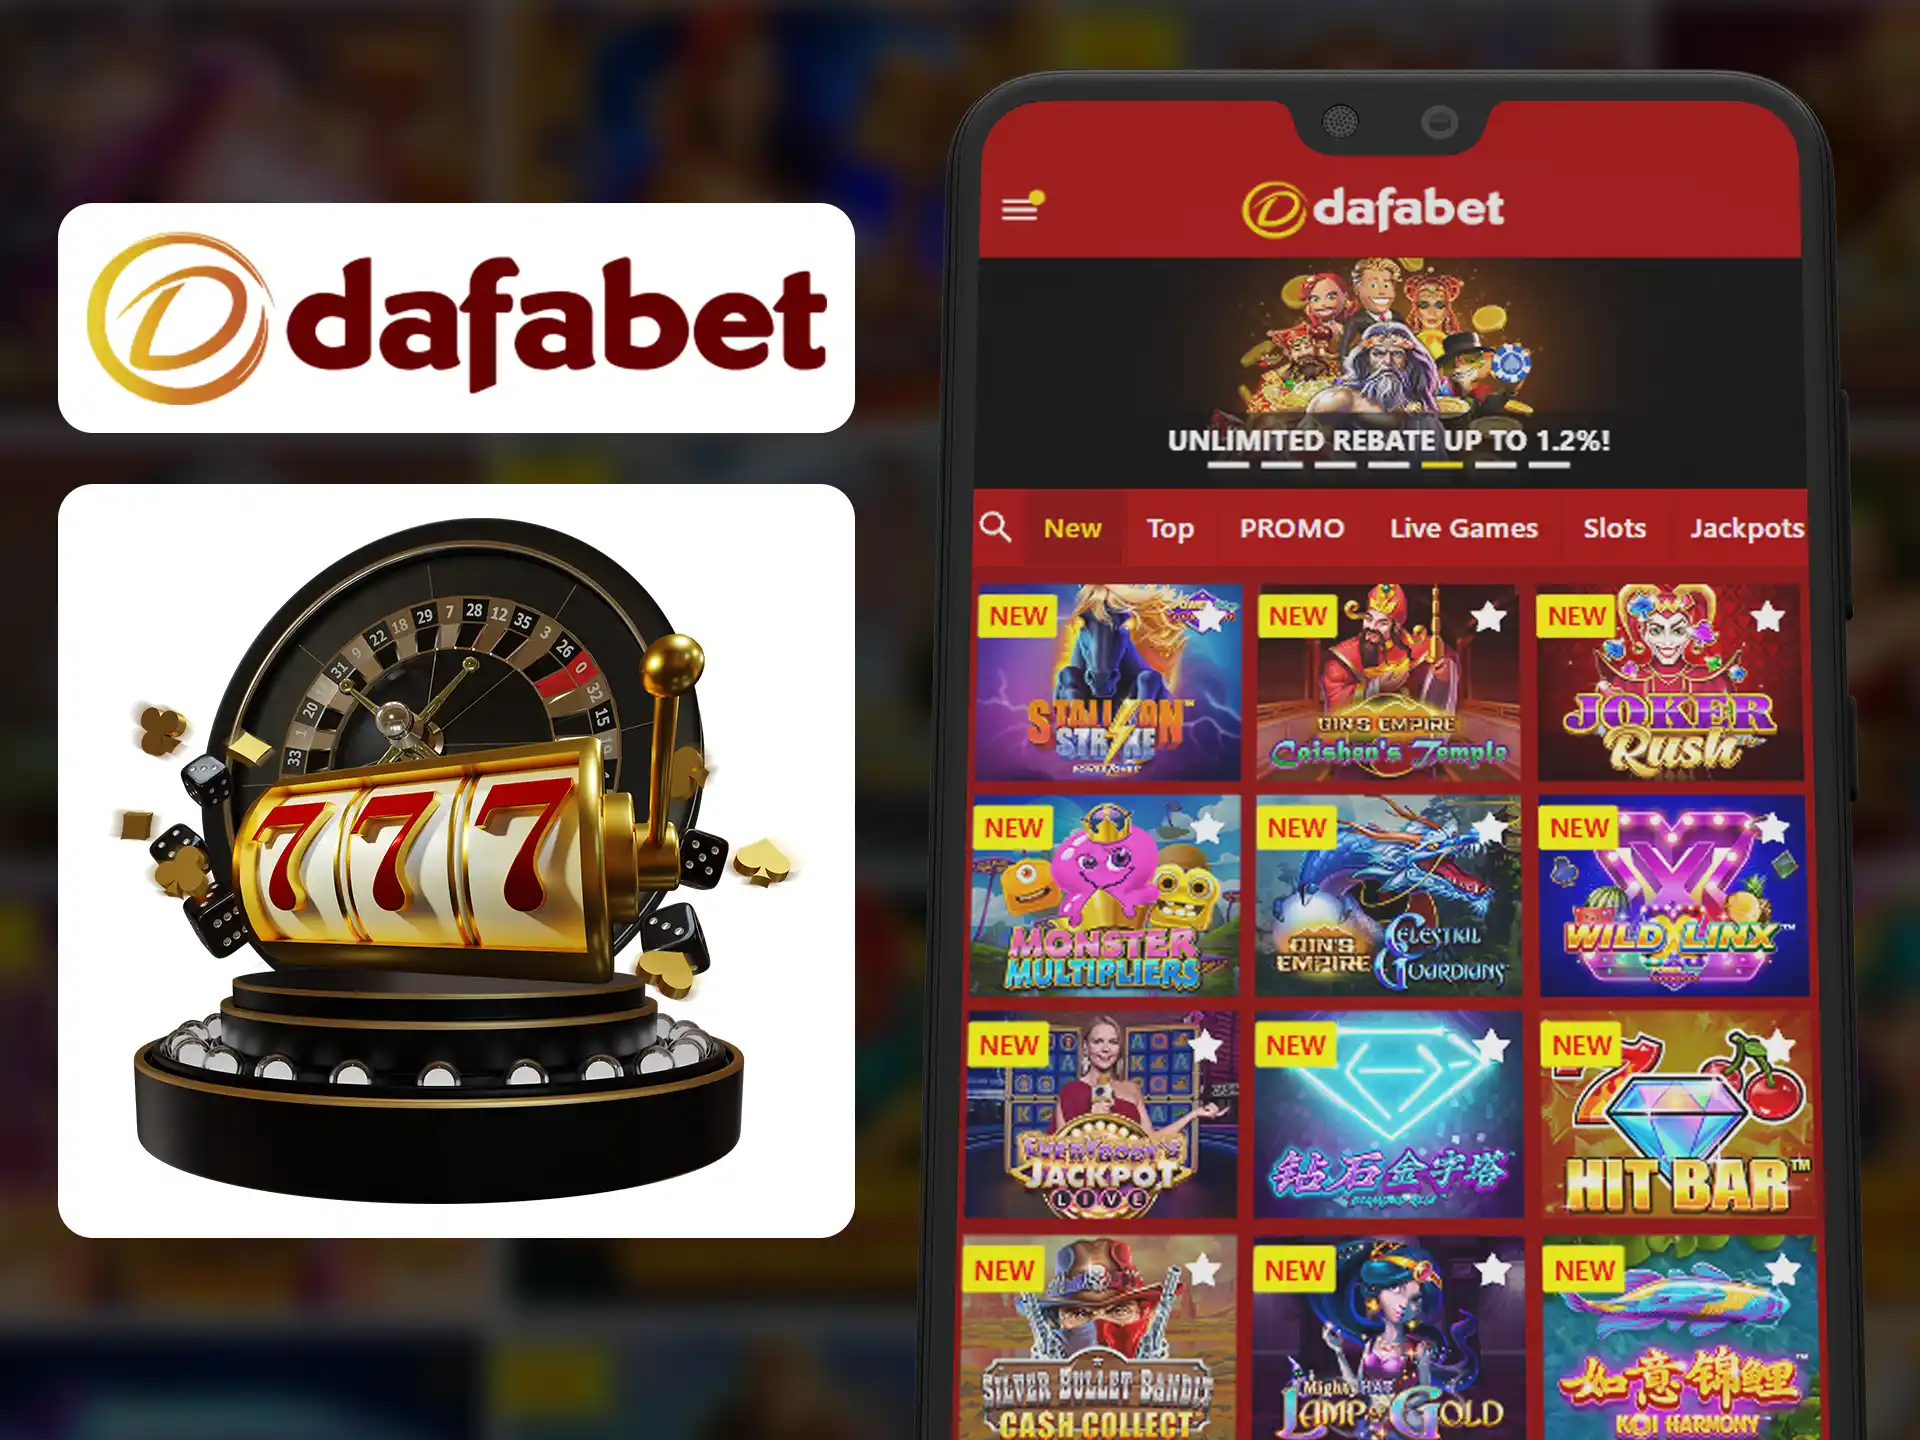 Search for your favourite casino games in Dafabet app.